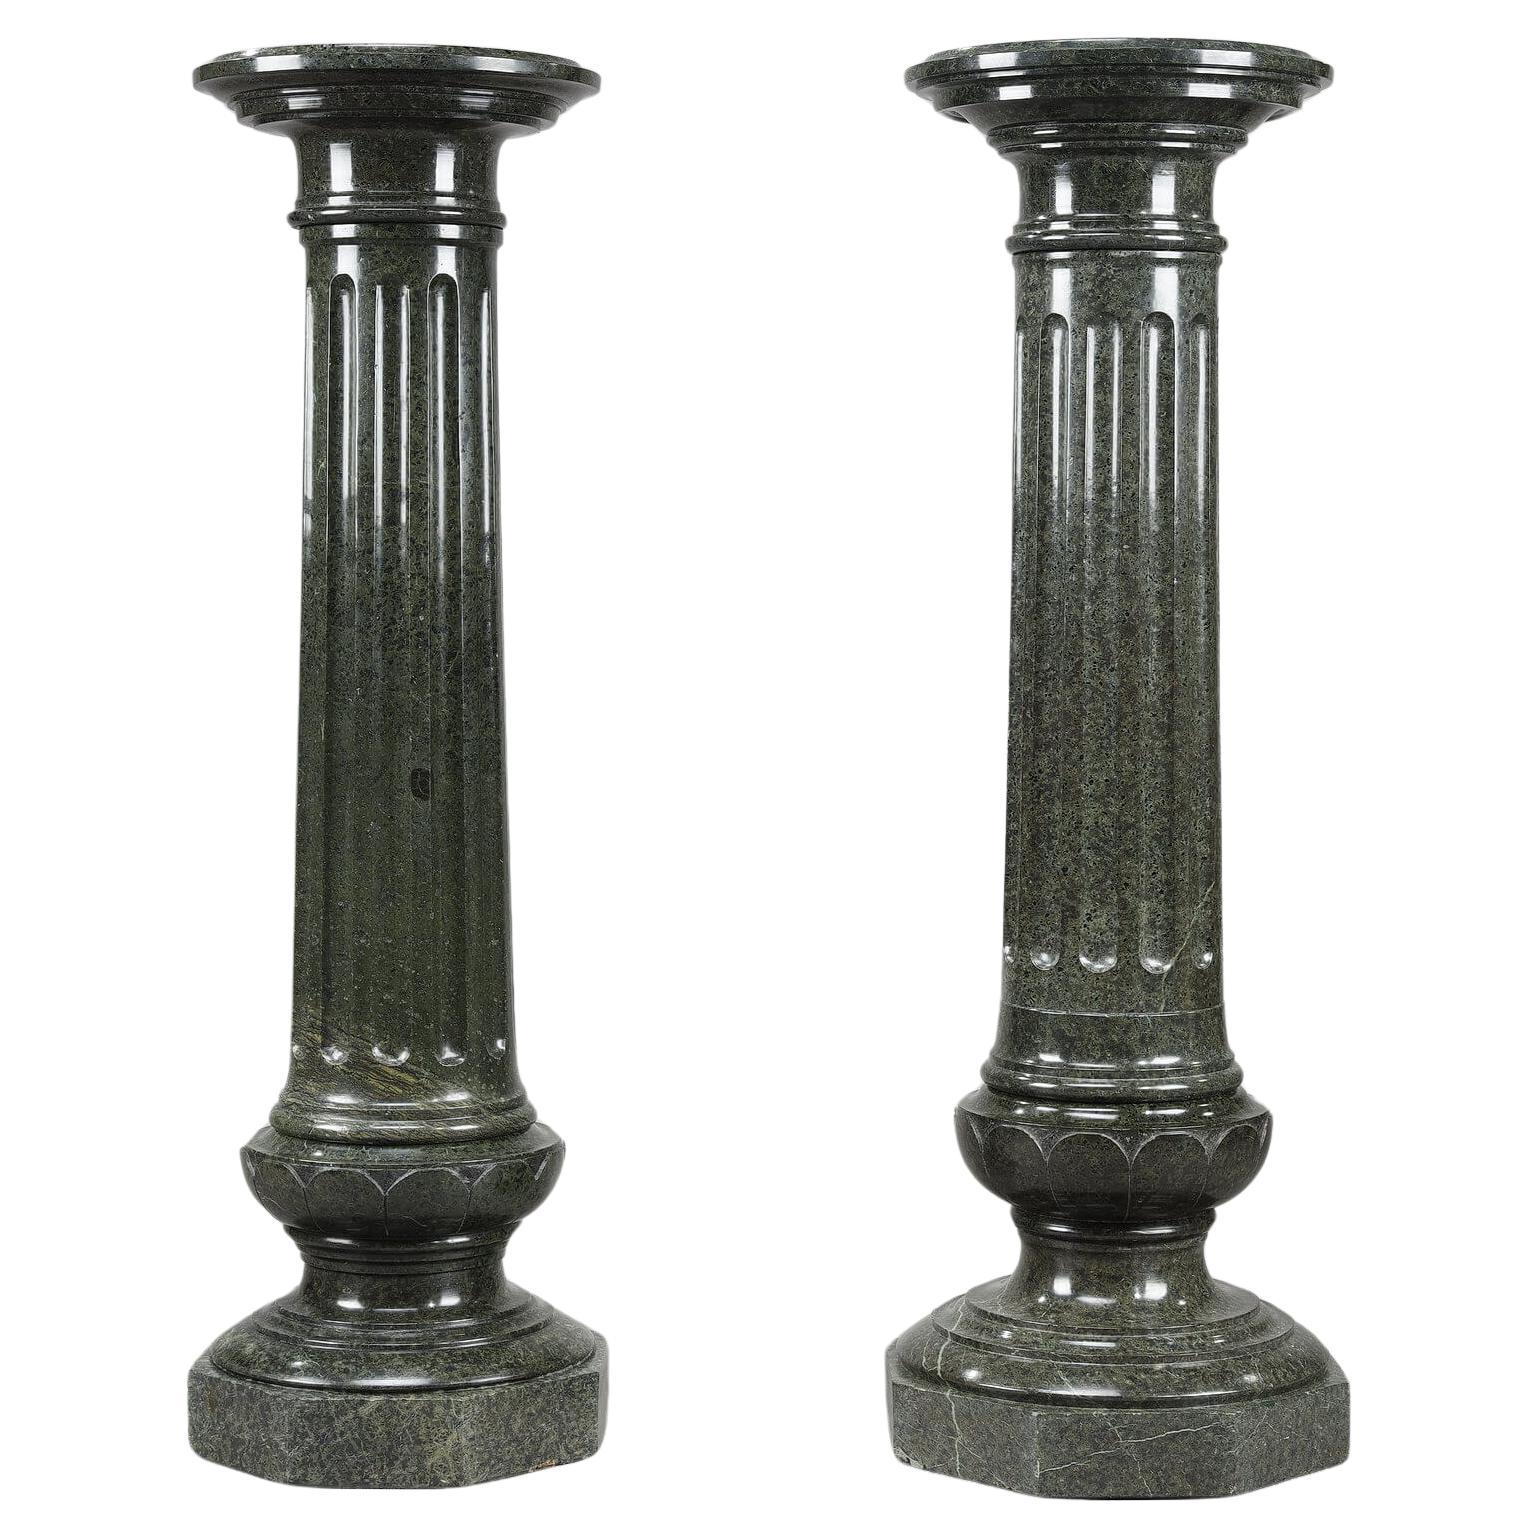 Two large fluted green marble columns